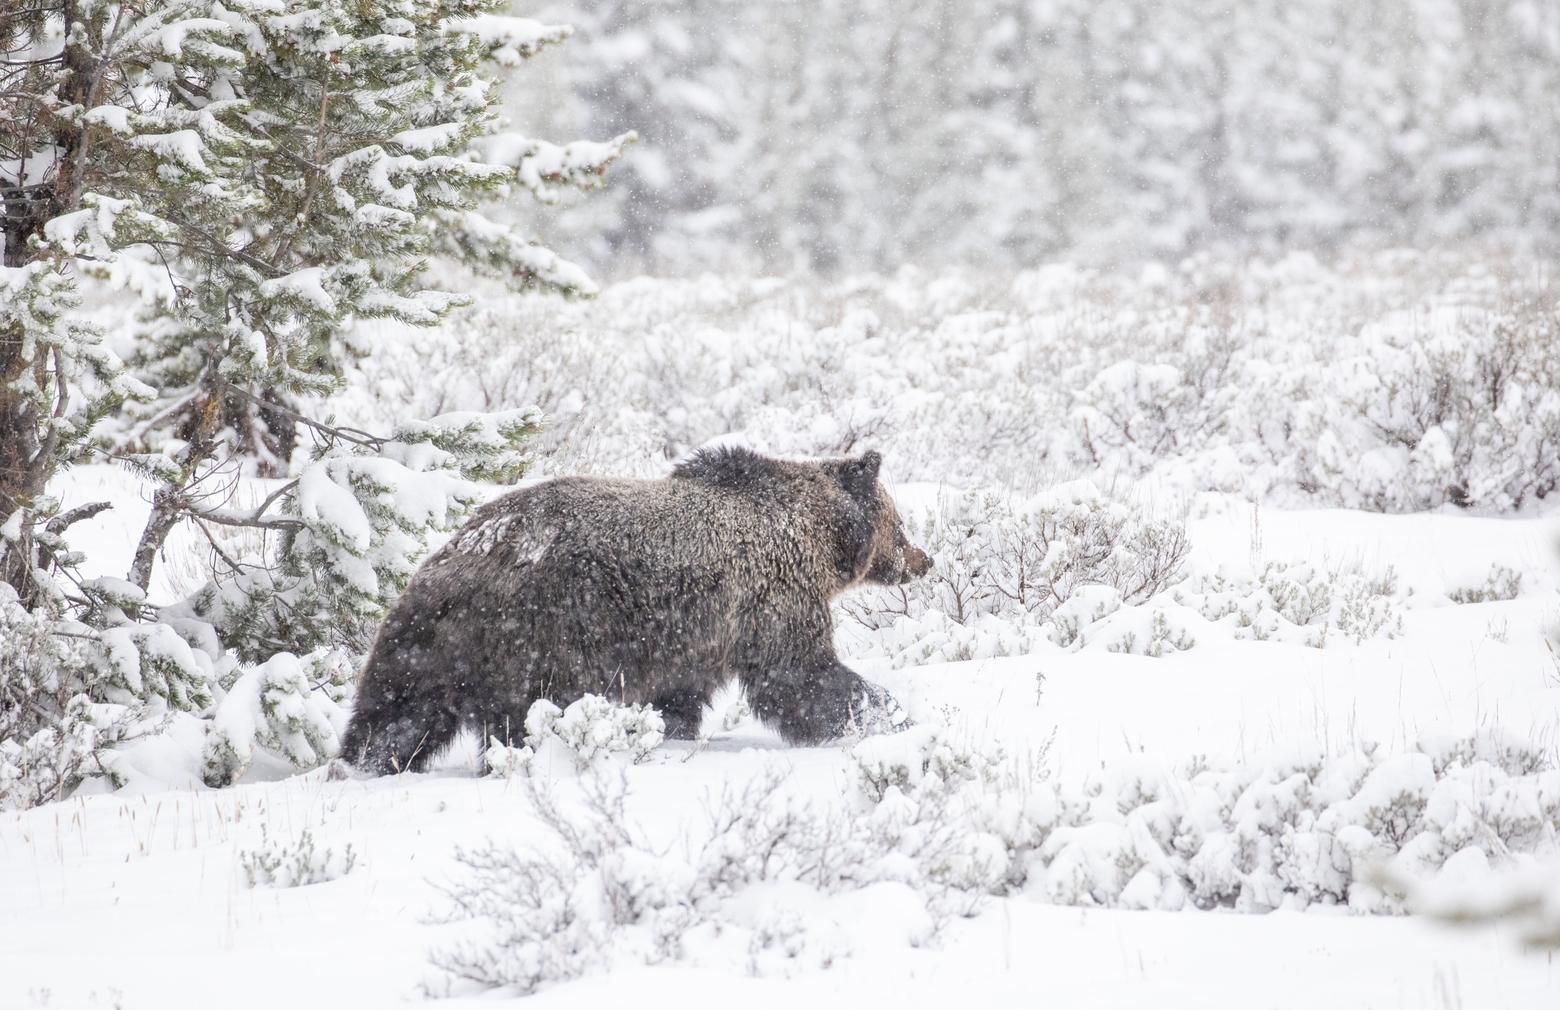 Grizzlies are emerging from their dens in Greater Yellowstone. Beware as you enjoy that last stretch of winter. Now is a good time to get a fresh can of bear spray. Photo courtesy Yellowstone National Park